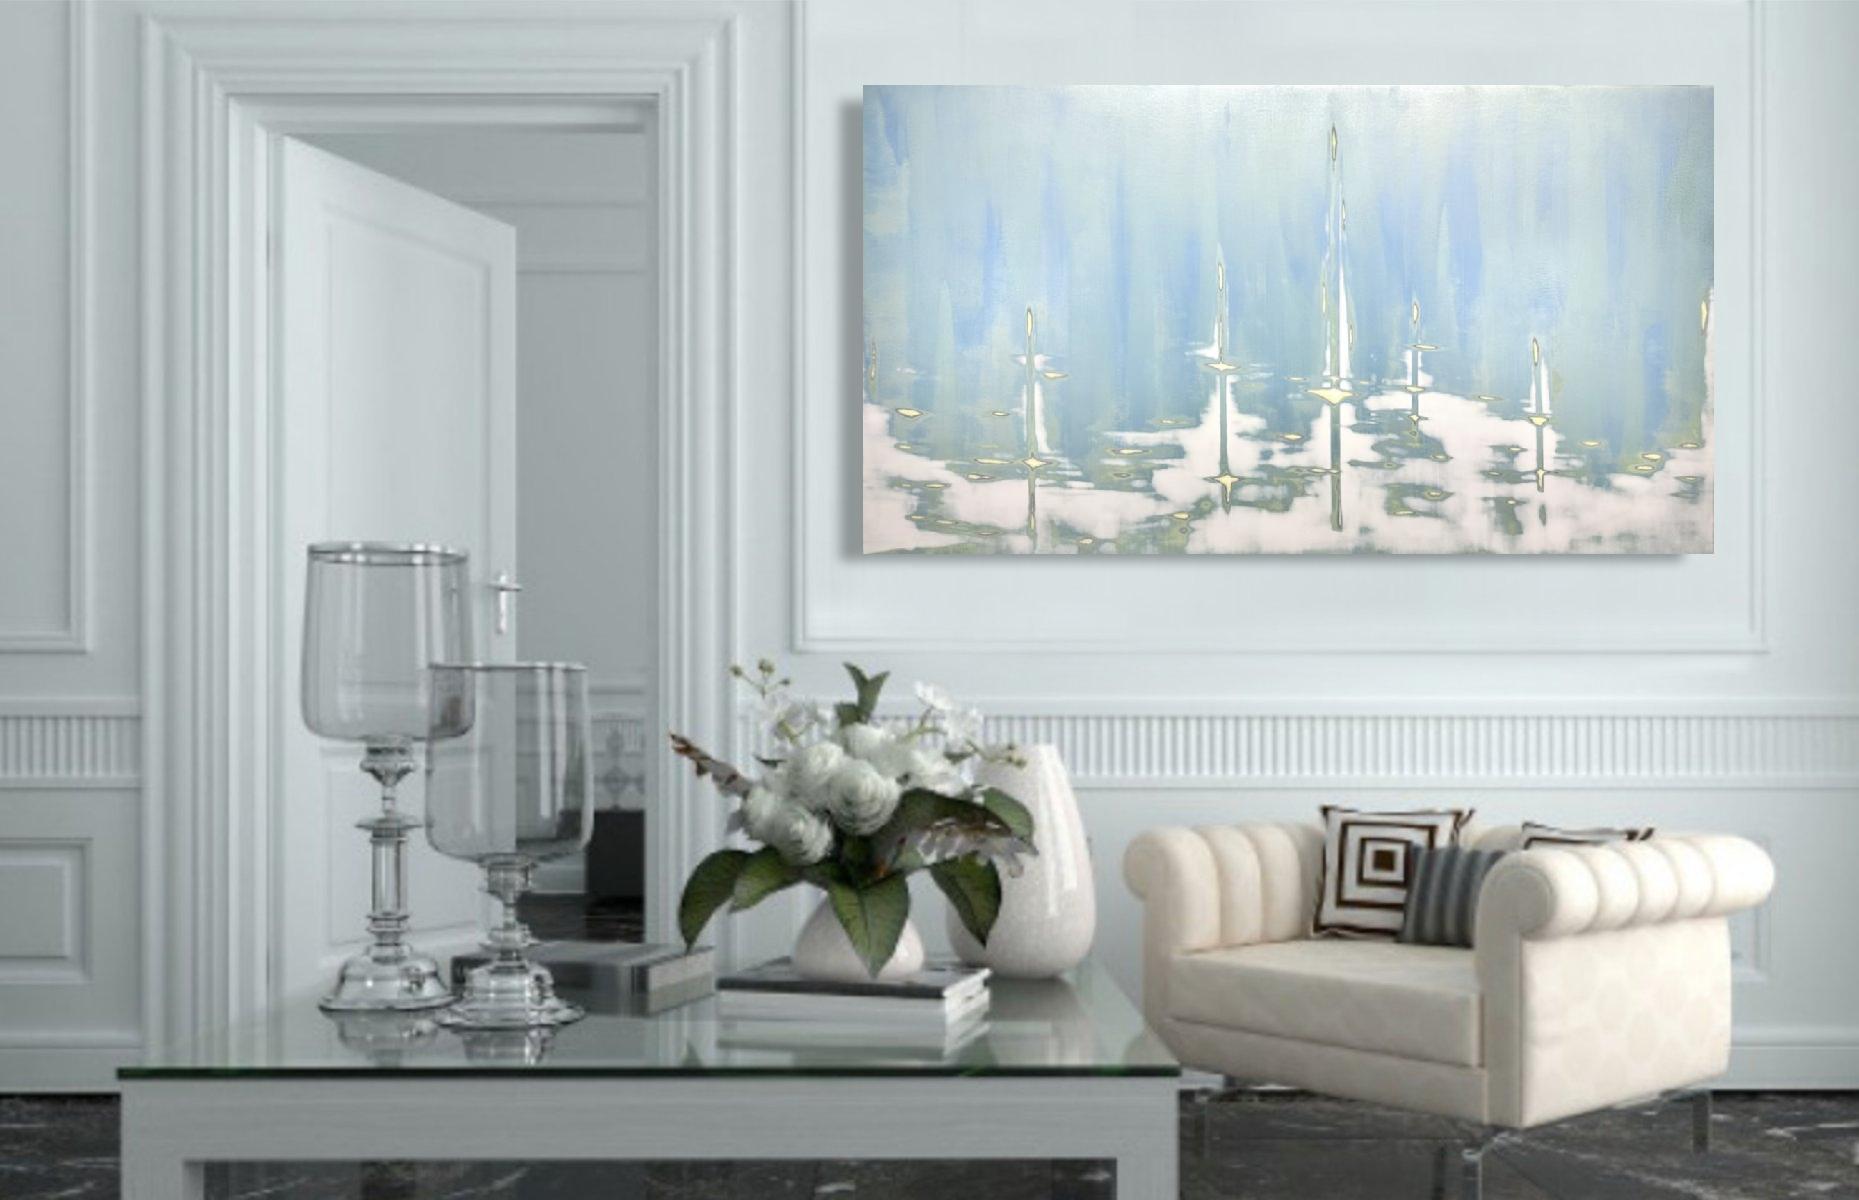 Luminous Blue/Silver Metallic Painting by Audra Weaser/ Drifting Tides 1